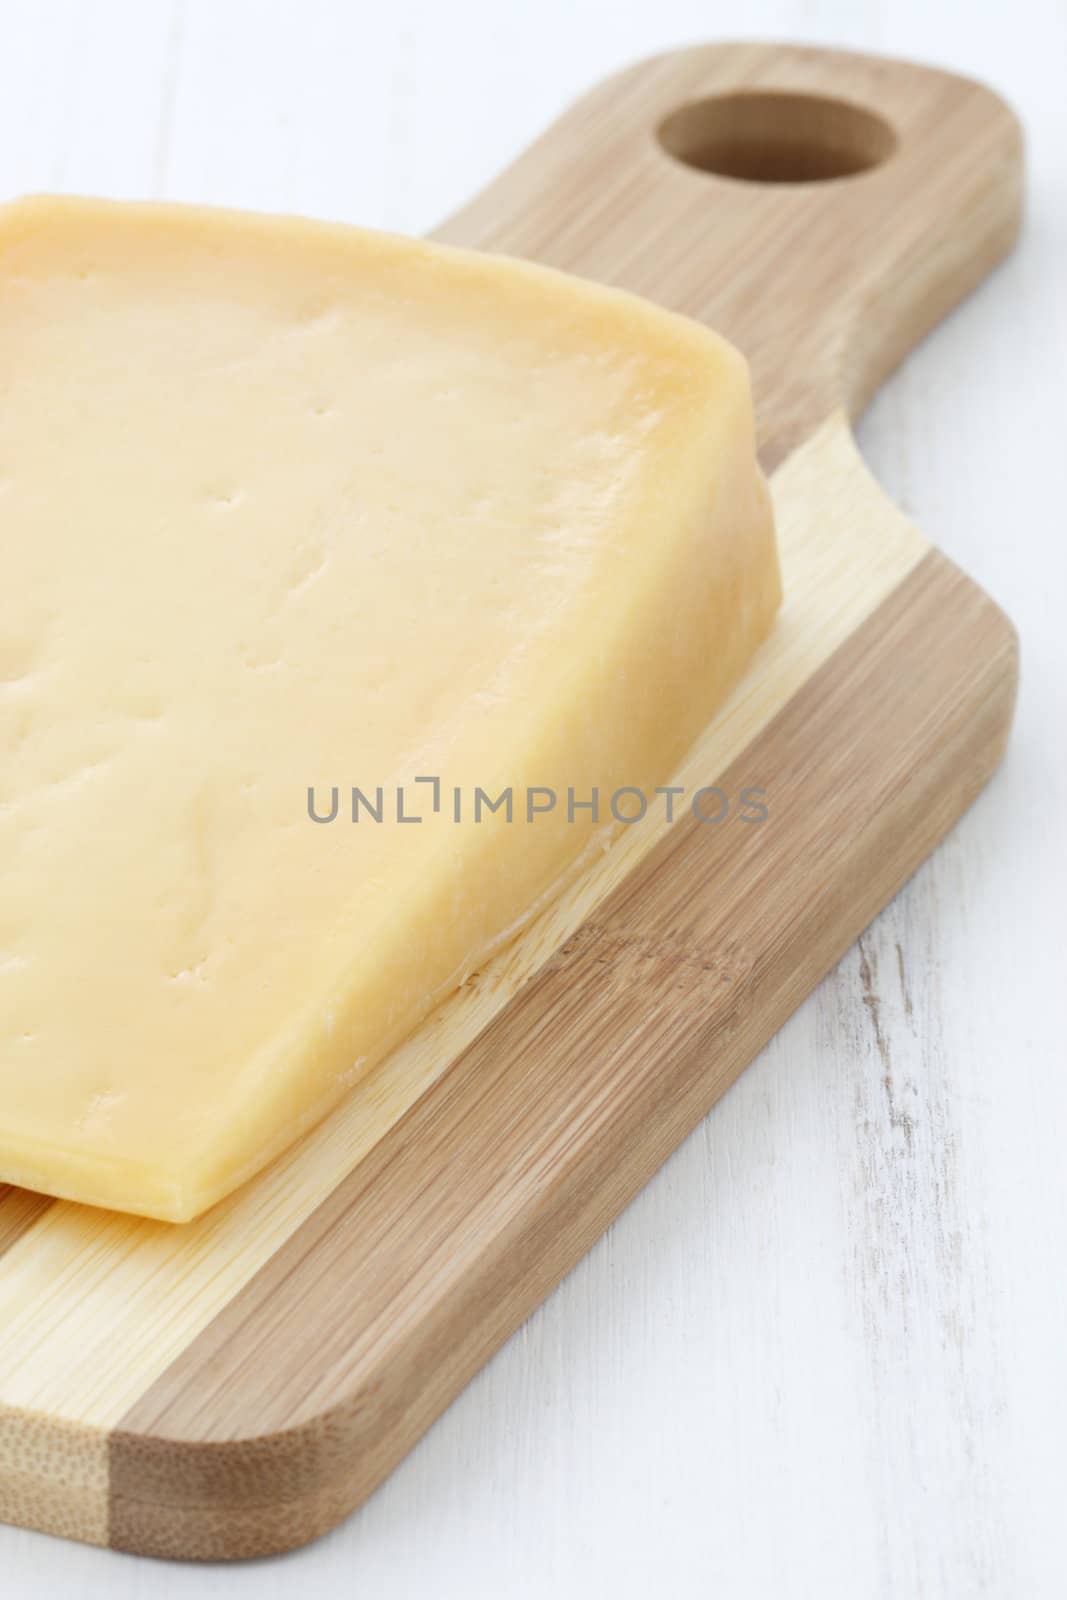 Delicious gourmet aged cheddar cheese, one of the world's most famous and delicious cheeses.